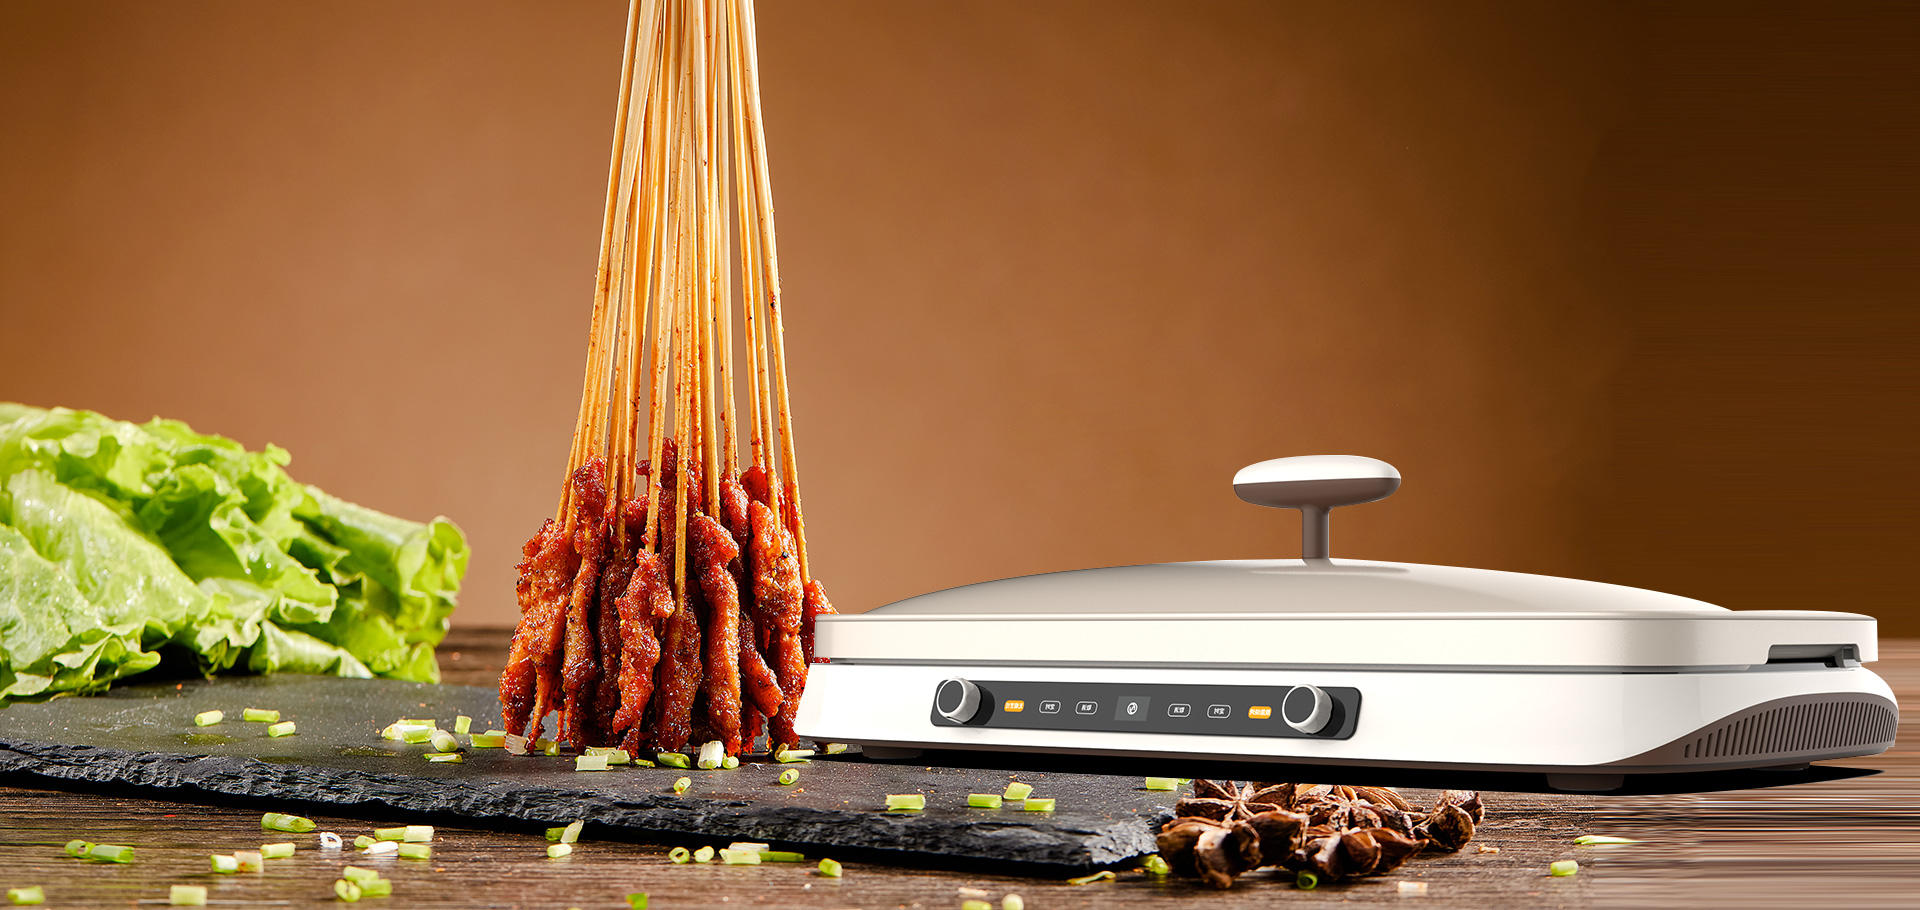 The Sizzle of the Horizontal Smokeless Barbecue Machine